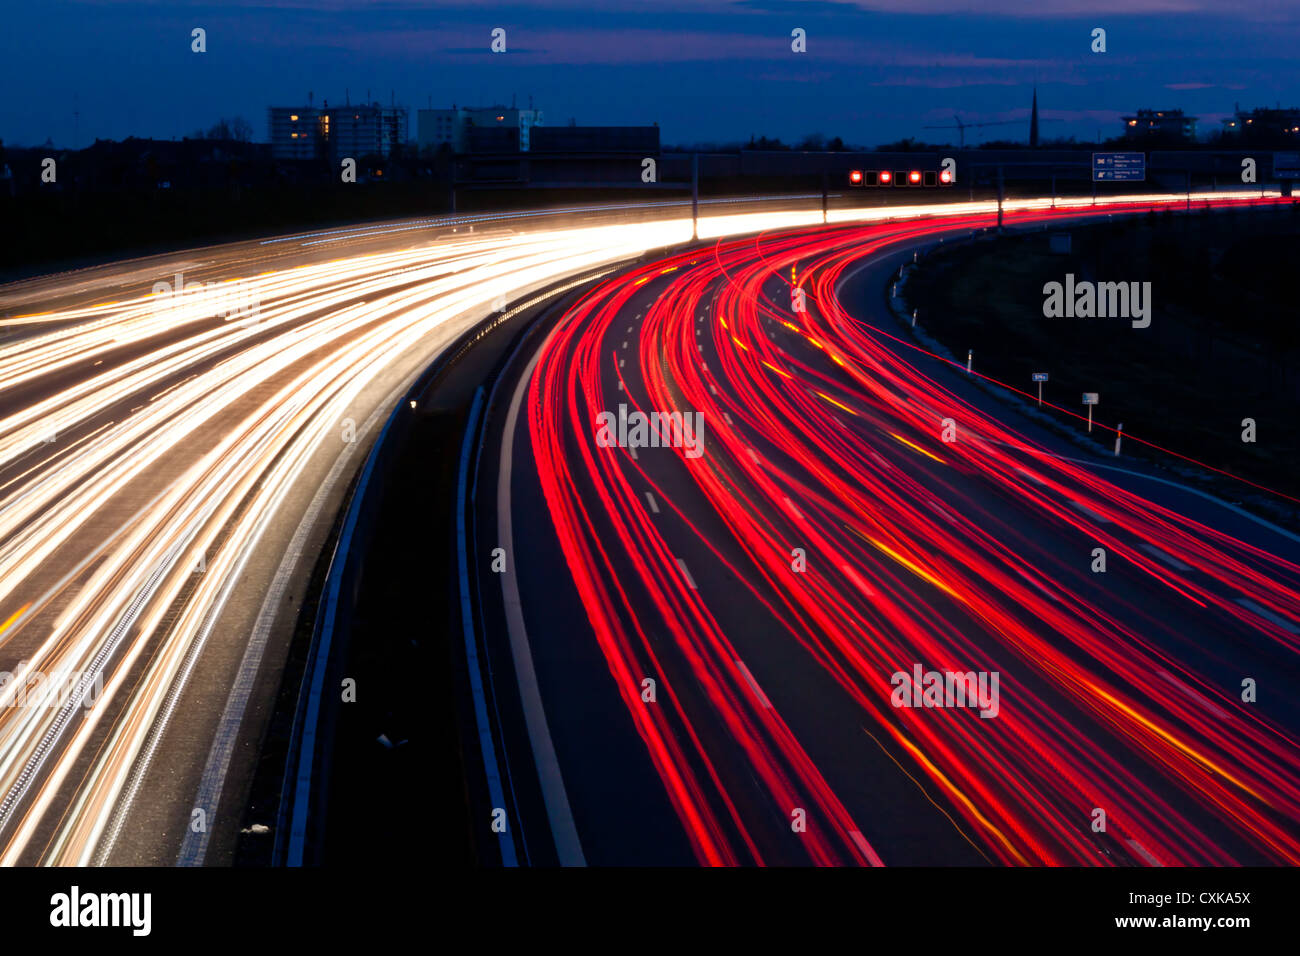 Cars were in the night on a highway Stock Photo